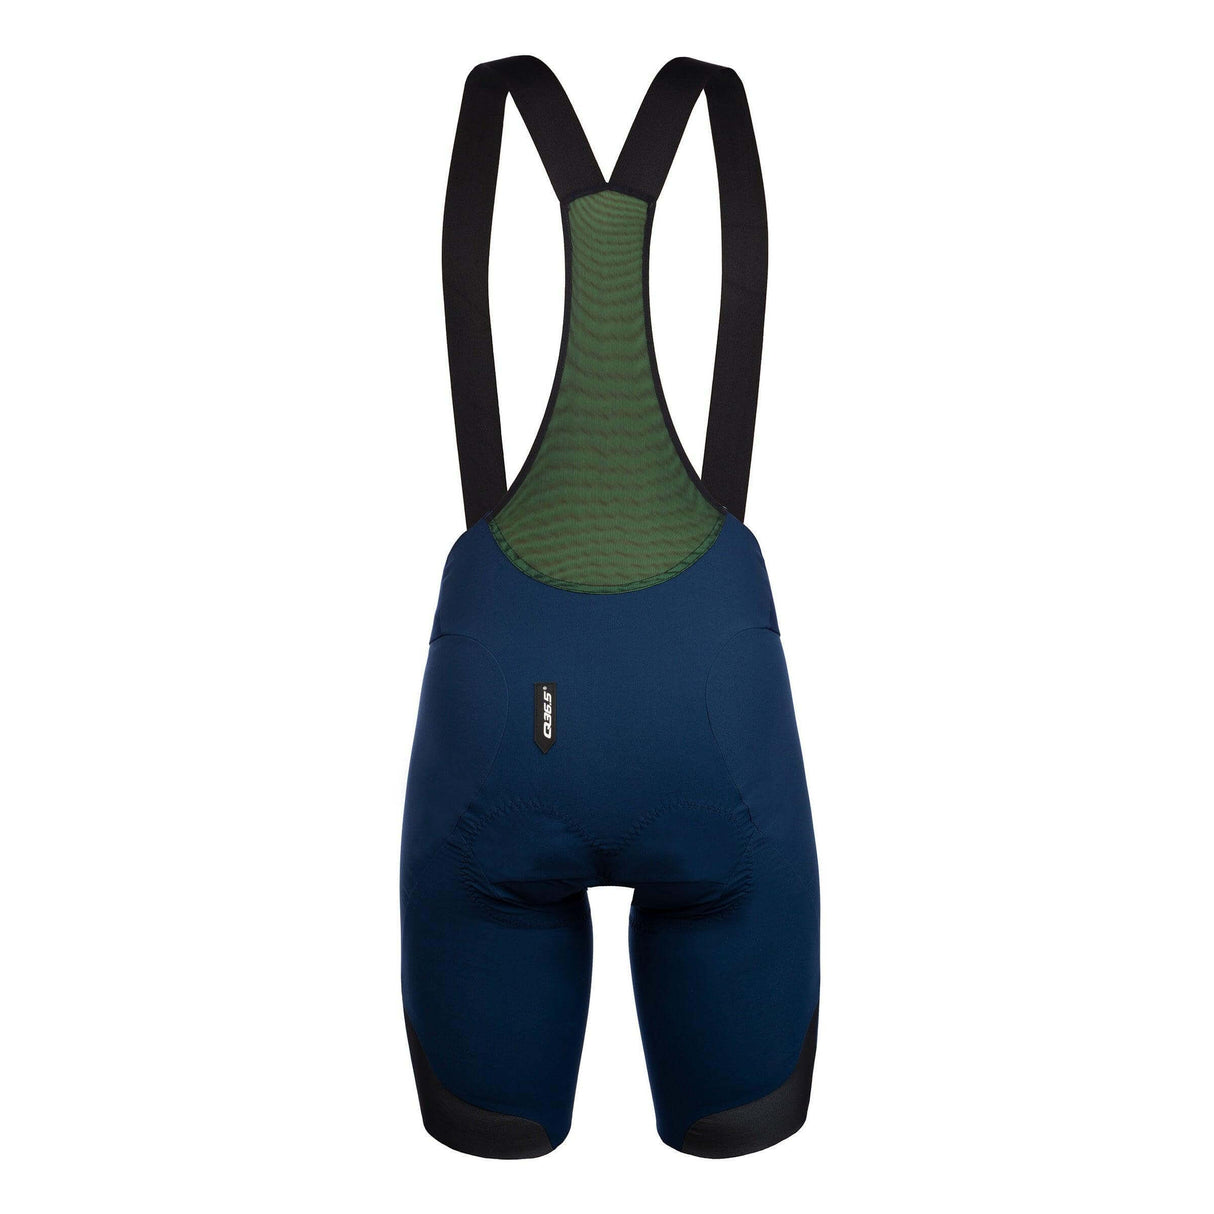 Q36.5 Salopette Wolf 2.0 Cycling Bib Shorts | Strictly Bicycles